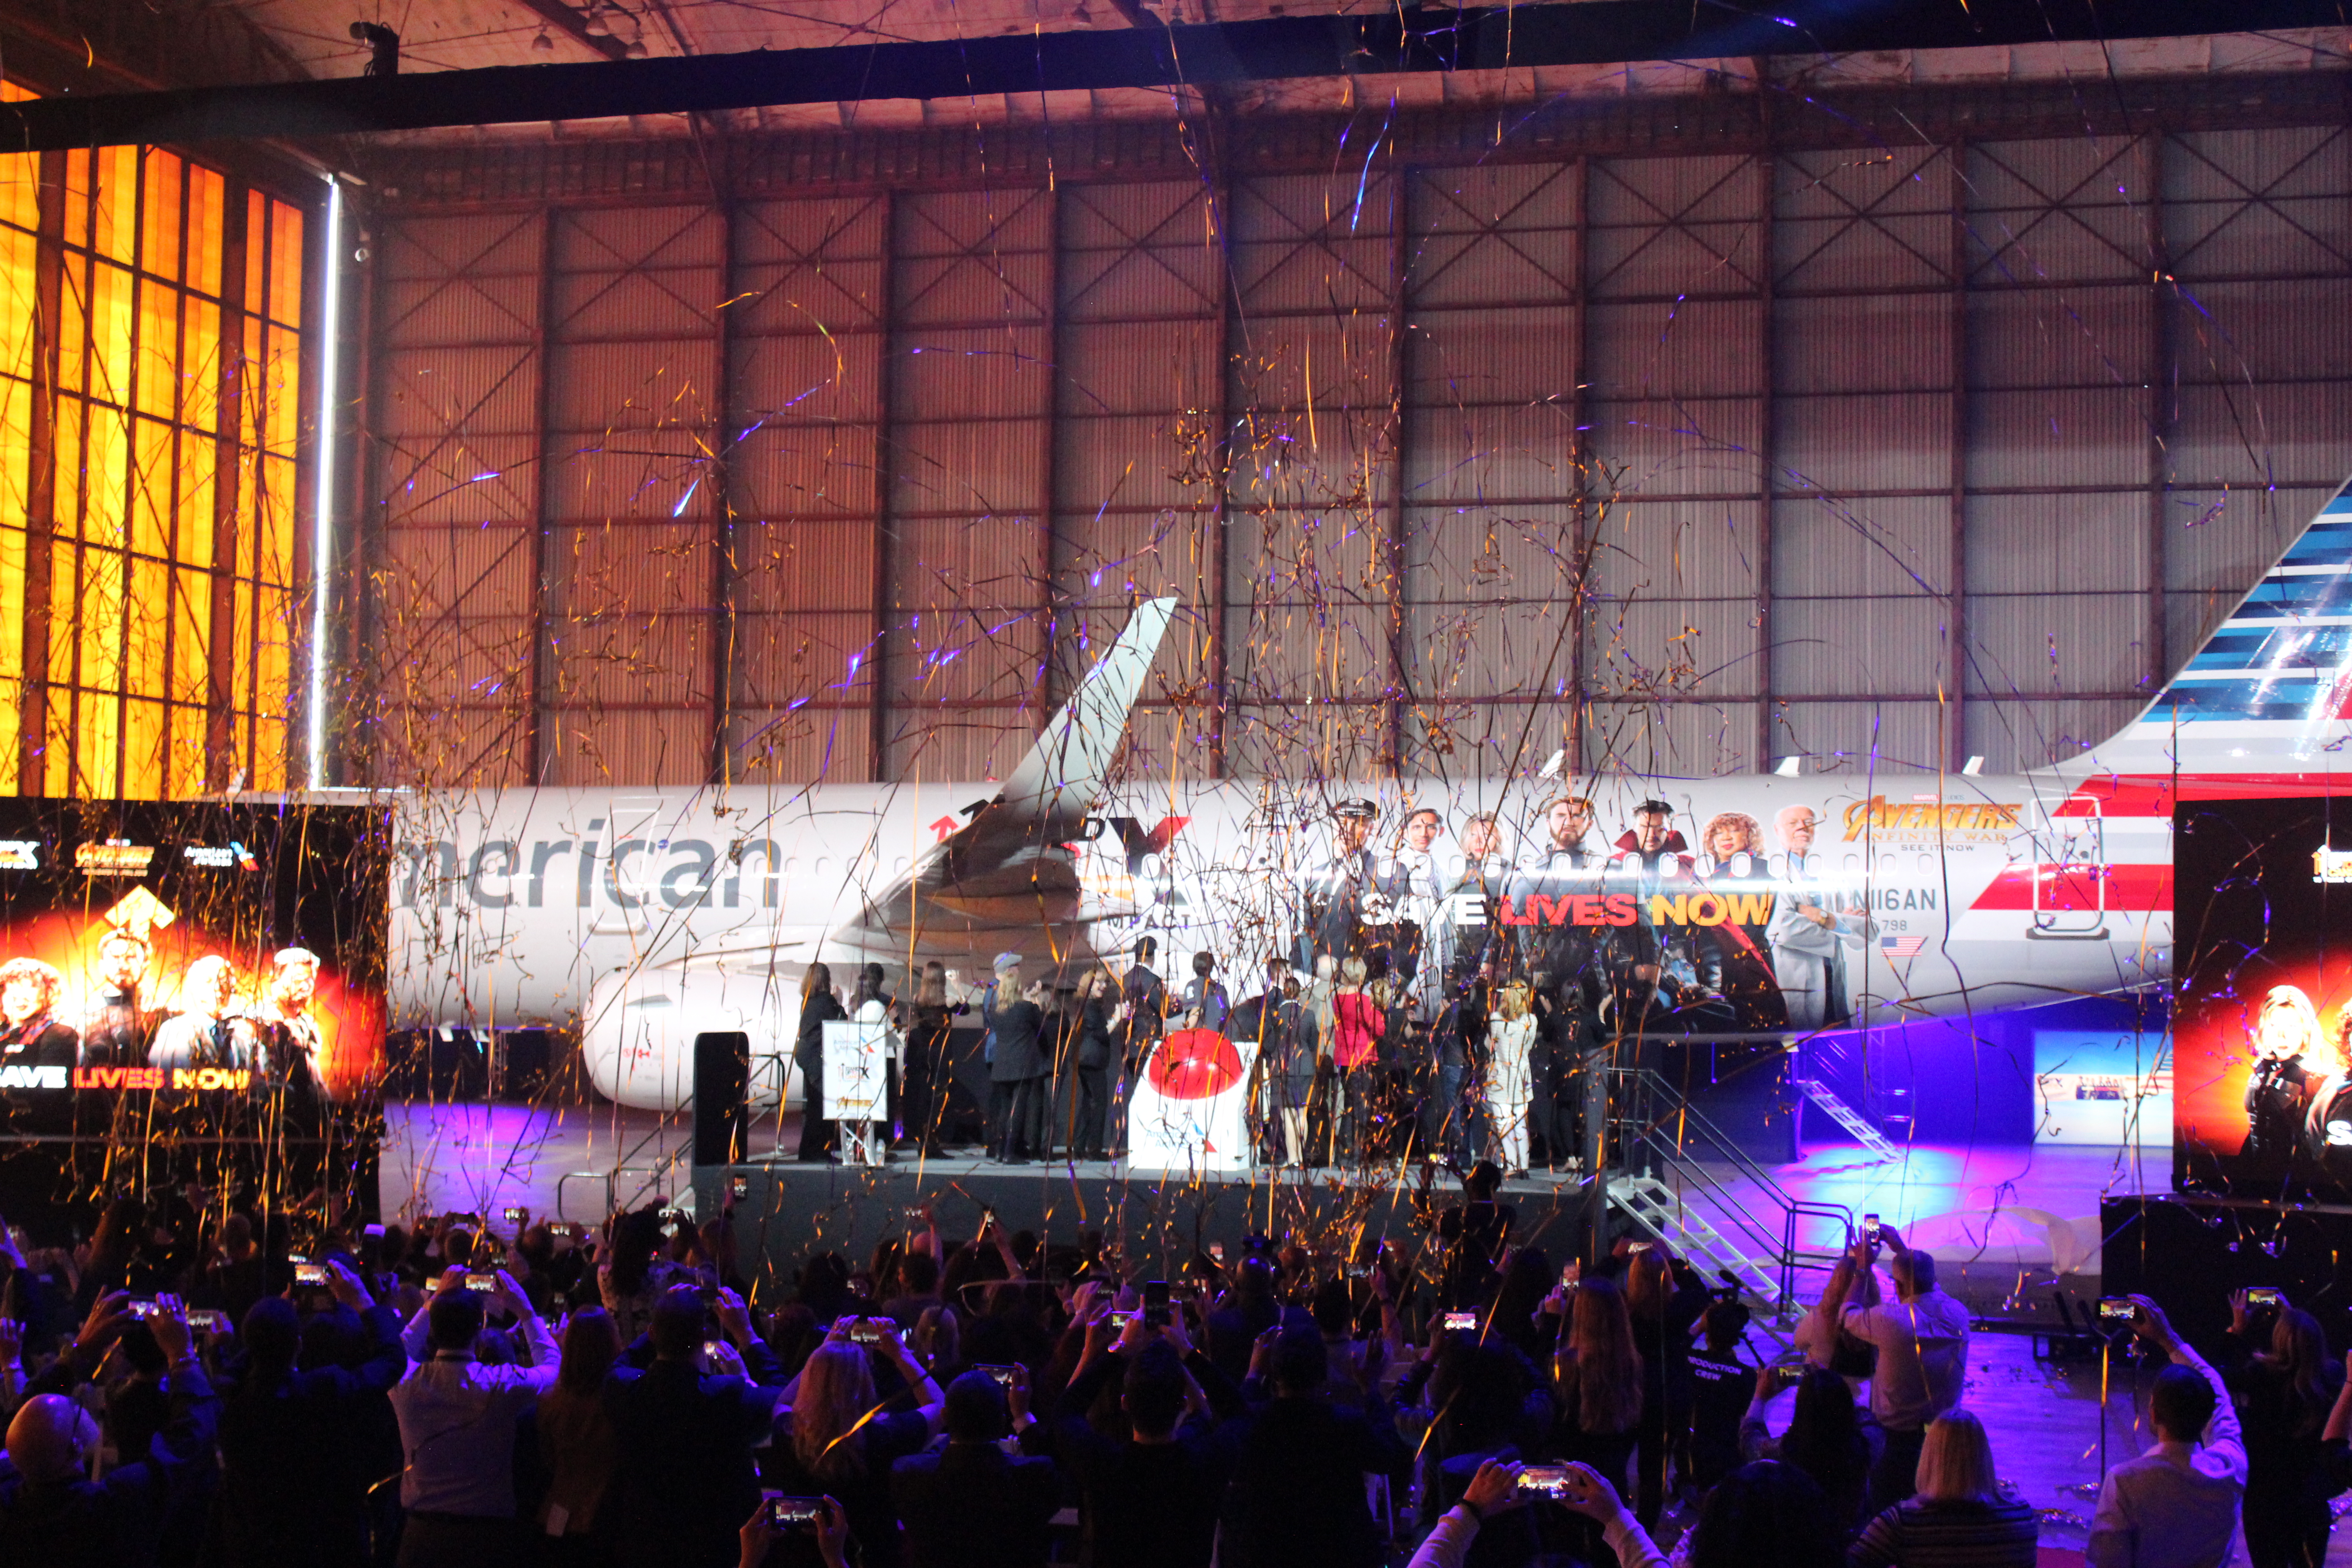 Dropping the Curtain on American's New SU2C/Avengers Livery